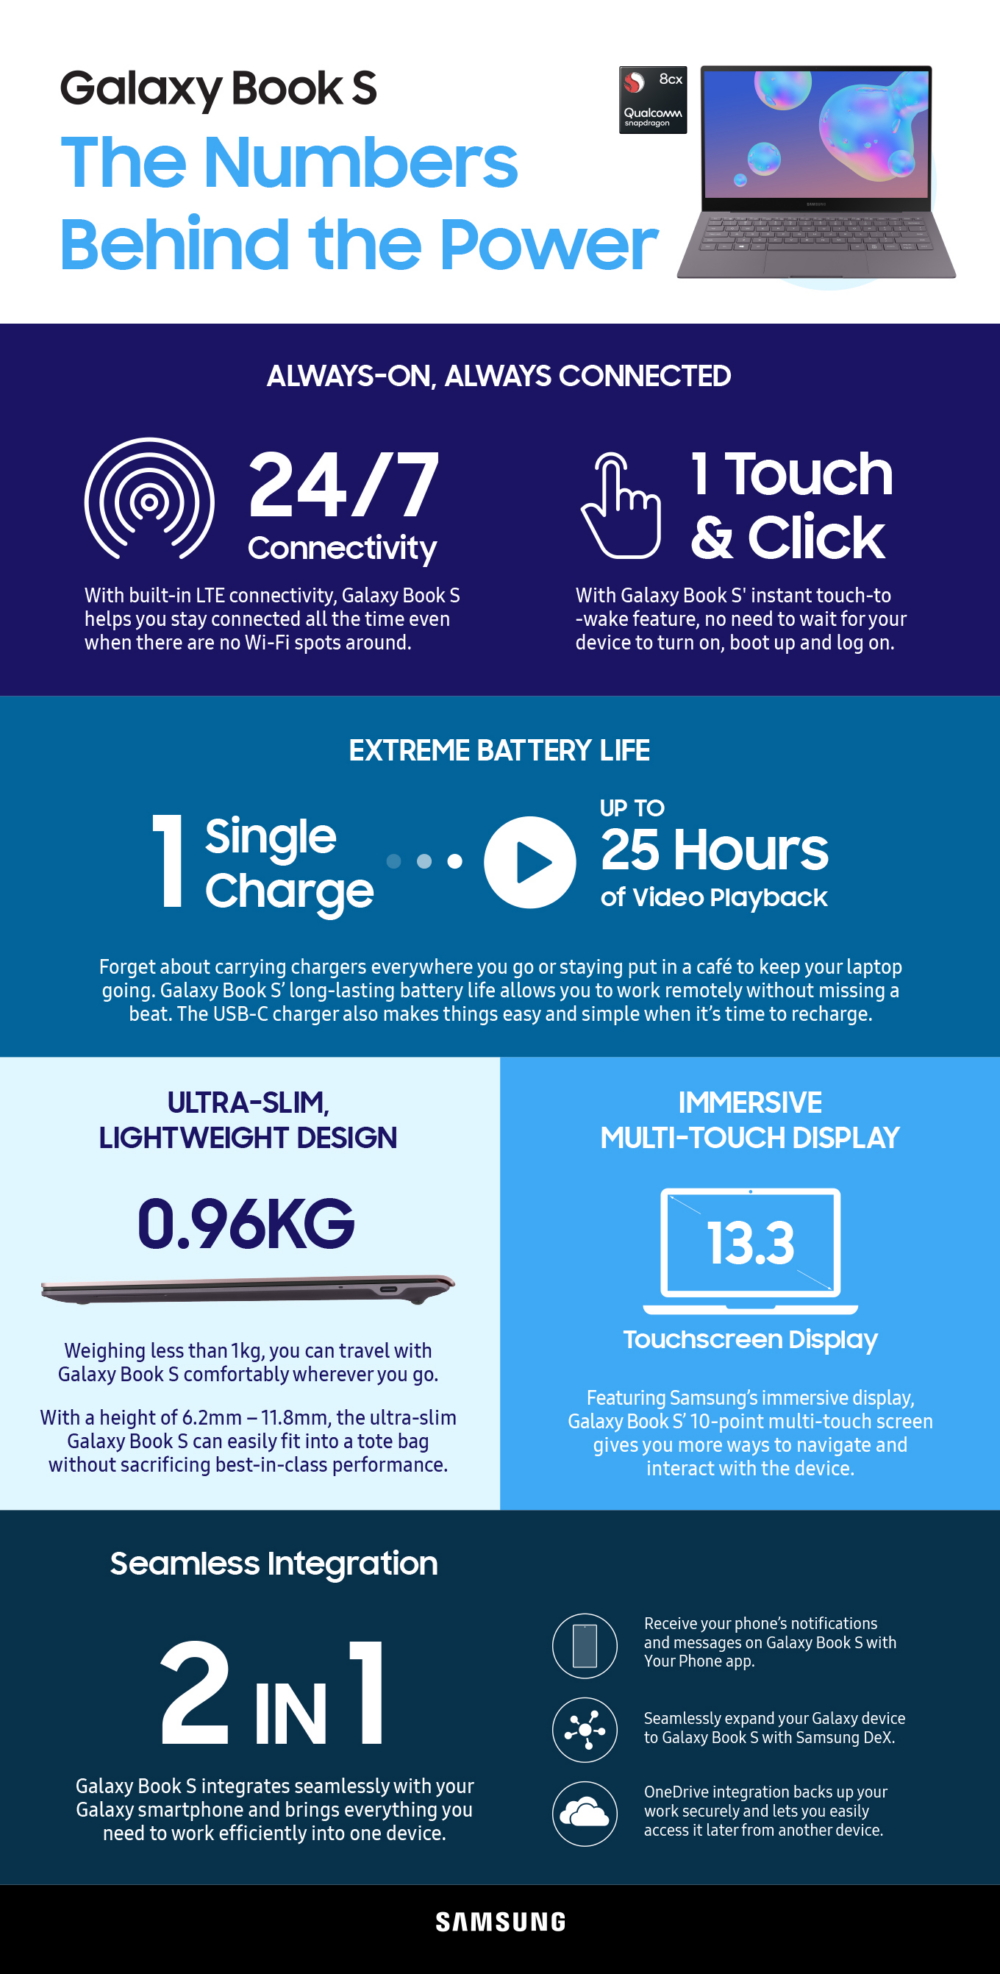 [Infographic] Samsung’s Galaxy Book S, in Numbers